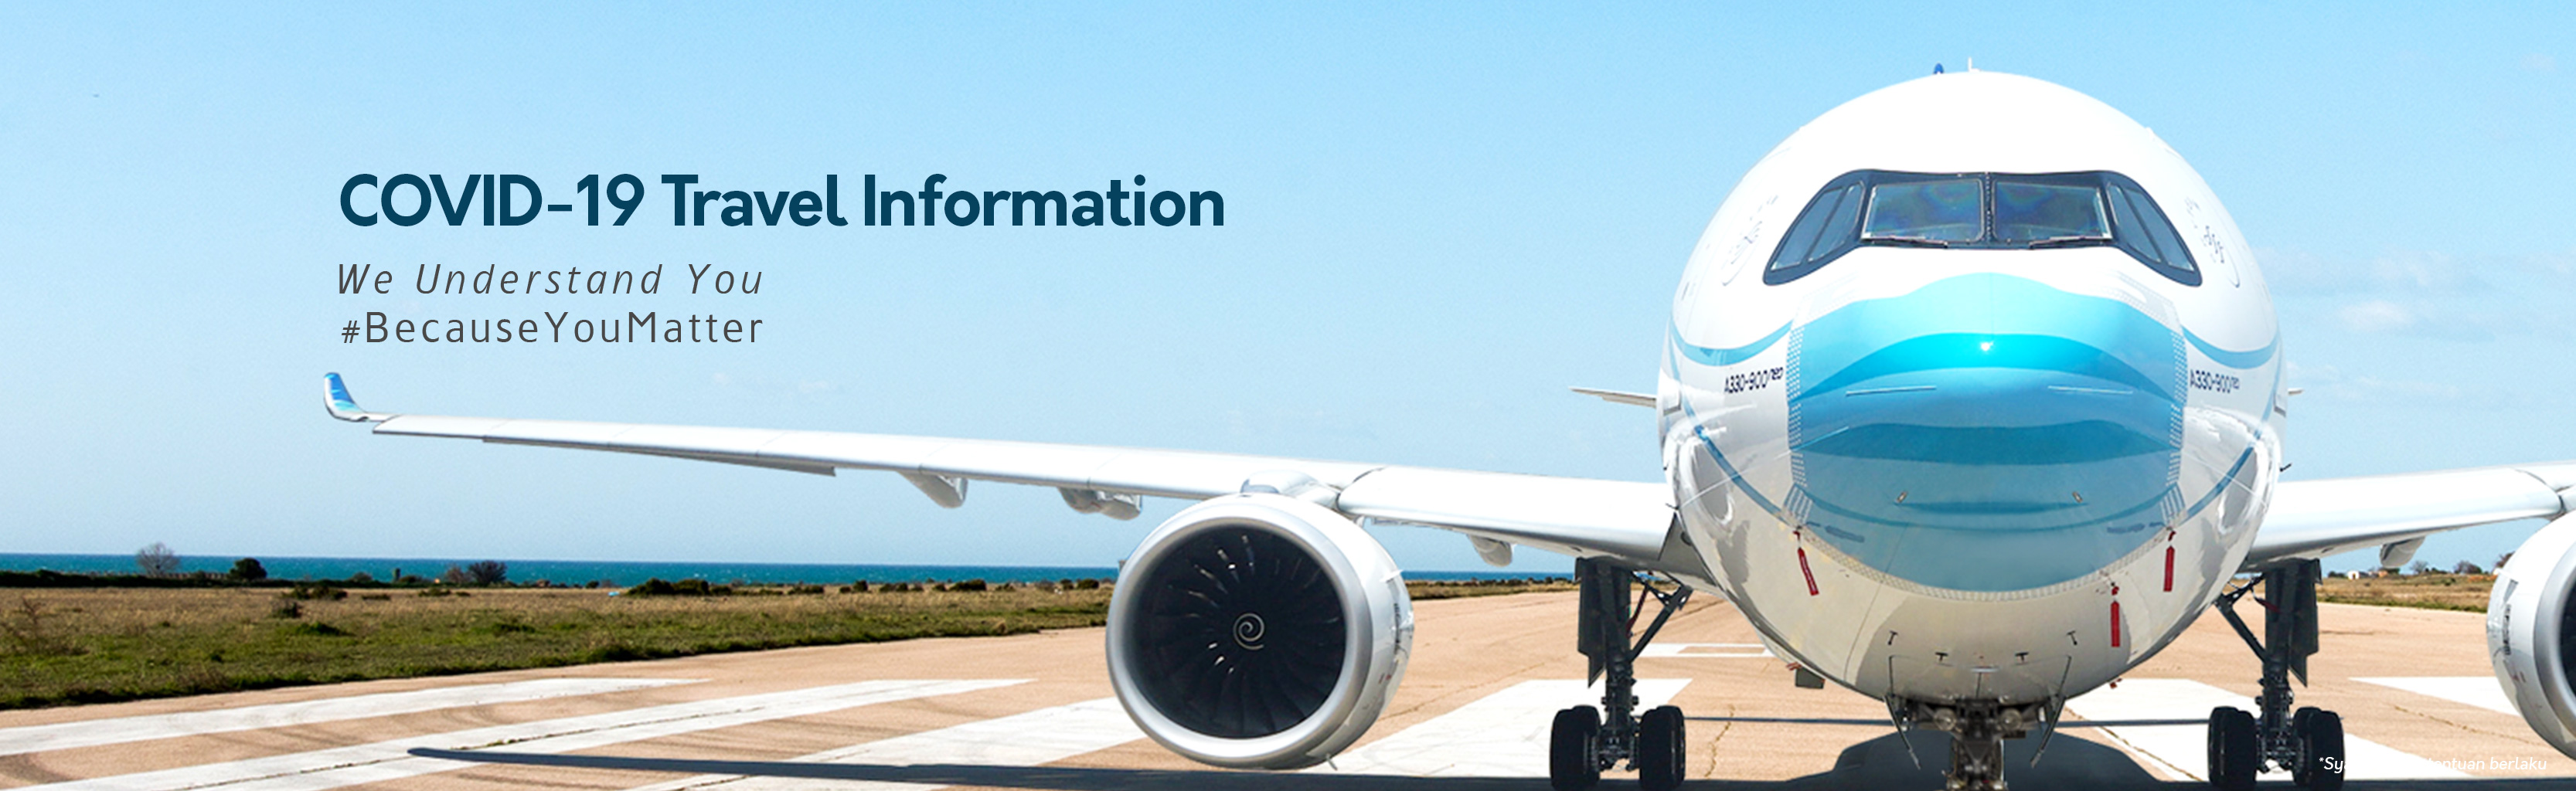 Information About Operational Policy Due To The Impact Covid-19 Outbreak - Garuda Indonesia